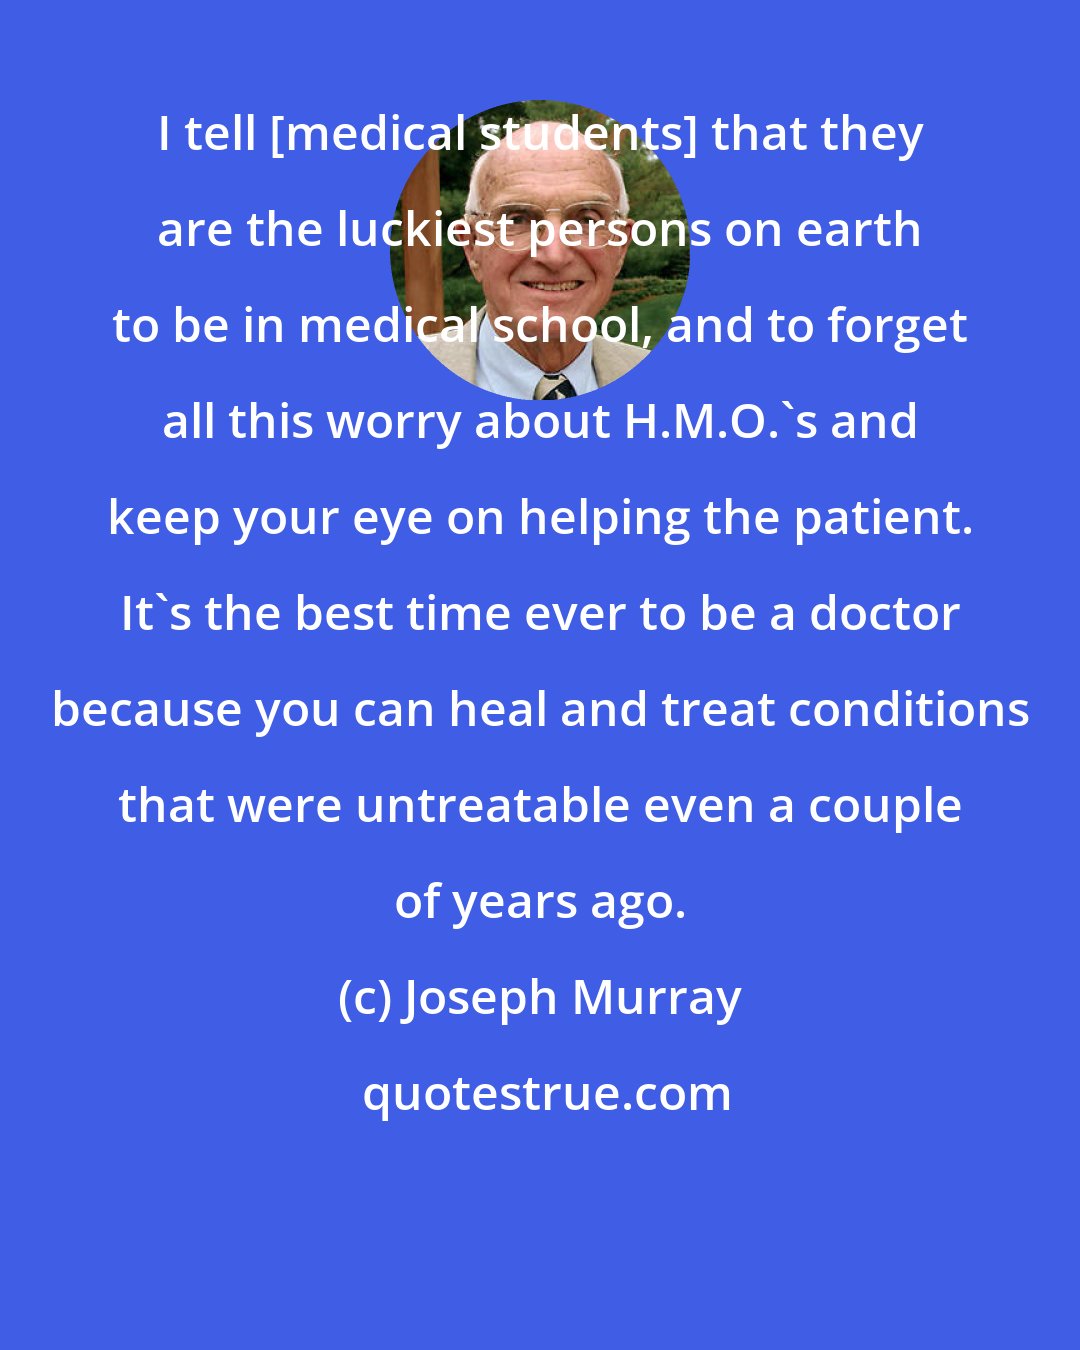 Joseph Murray: I tell [medical students] that they are the luckiest persons on earth to be in medical school, and to forget all this worry about H.M.O.'s and keep your eye on helping the patient. It's the best time ever to be a doctor because you can heal and treat conditions that were untreatable even a couple of years ago.